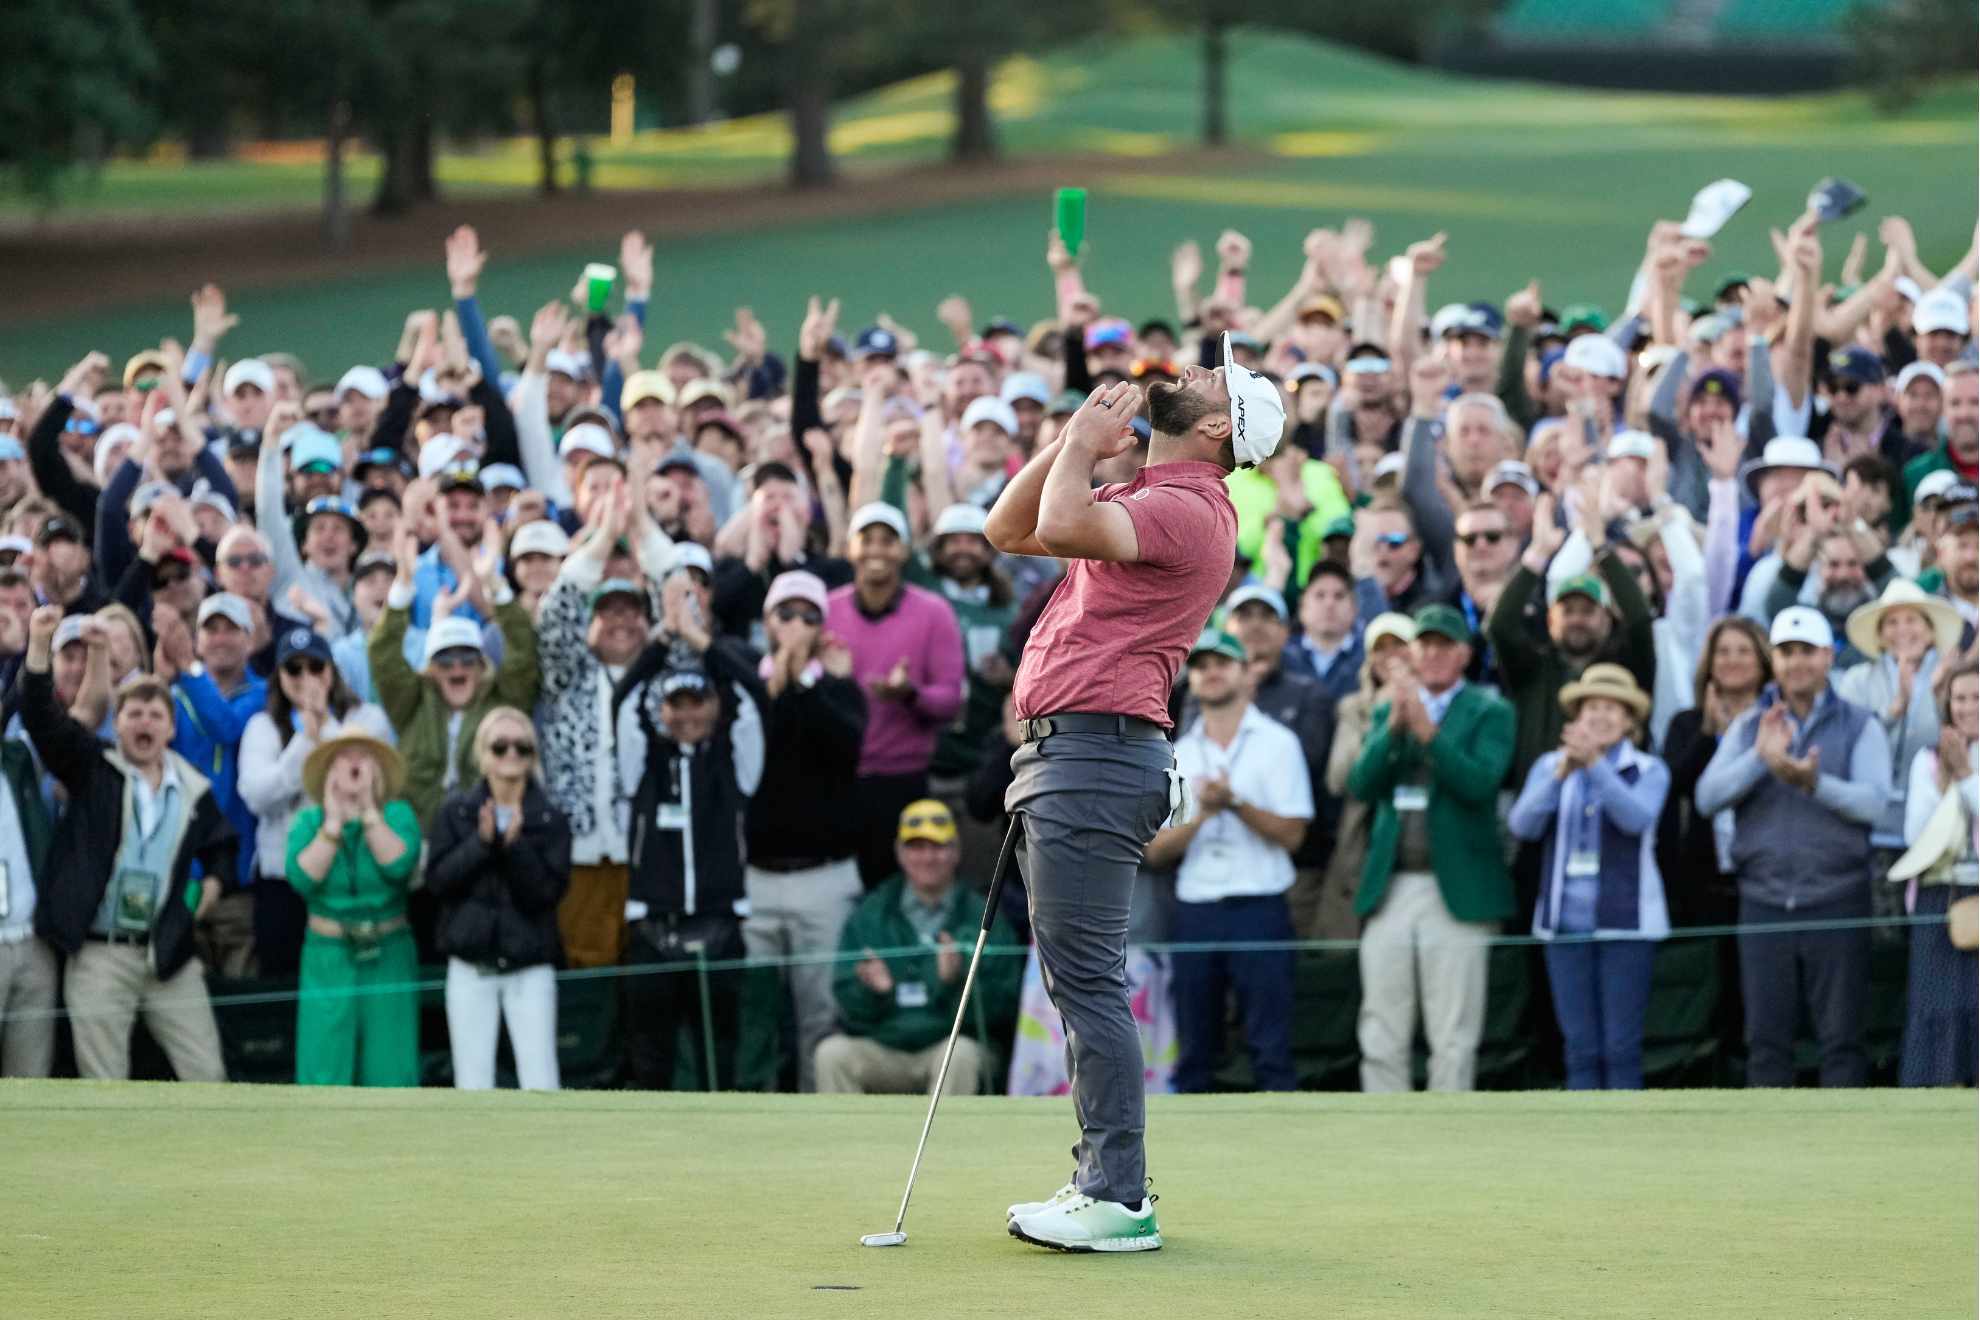 Jon Rahm, of Spain, celebrates on the 18th green after wining the Masters golf tournament at Augusta National Golf Club on Sunday, April 9, 2023, in Augusta, Ga.